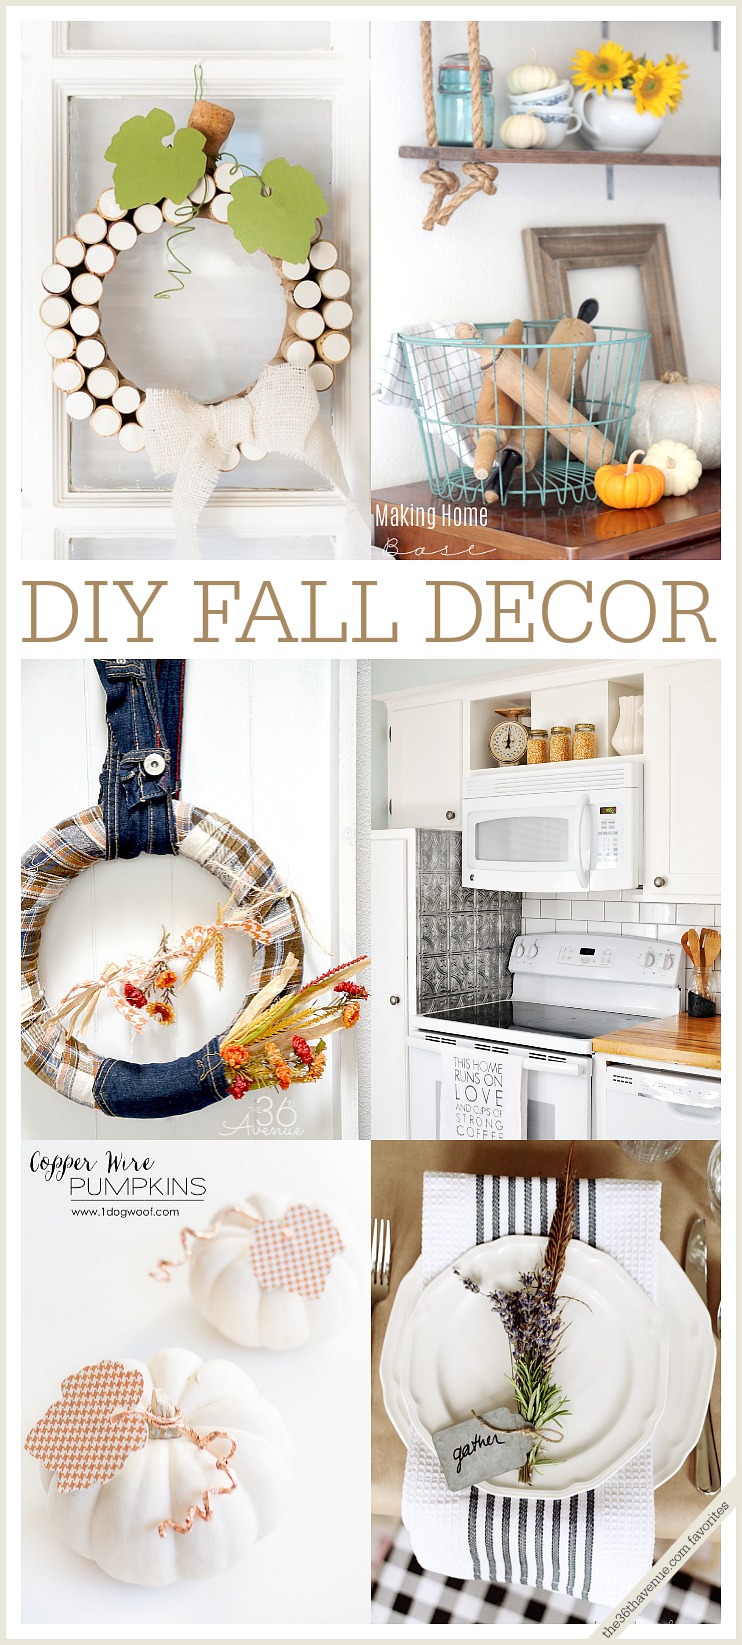 The top 22 Ideas About Home Decor Diy - Home Inspiration and Ideas